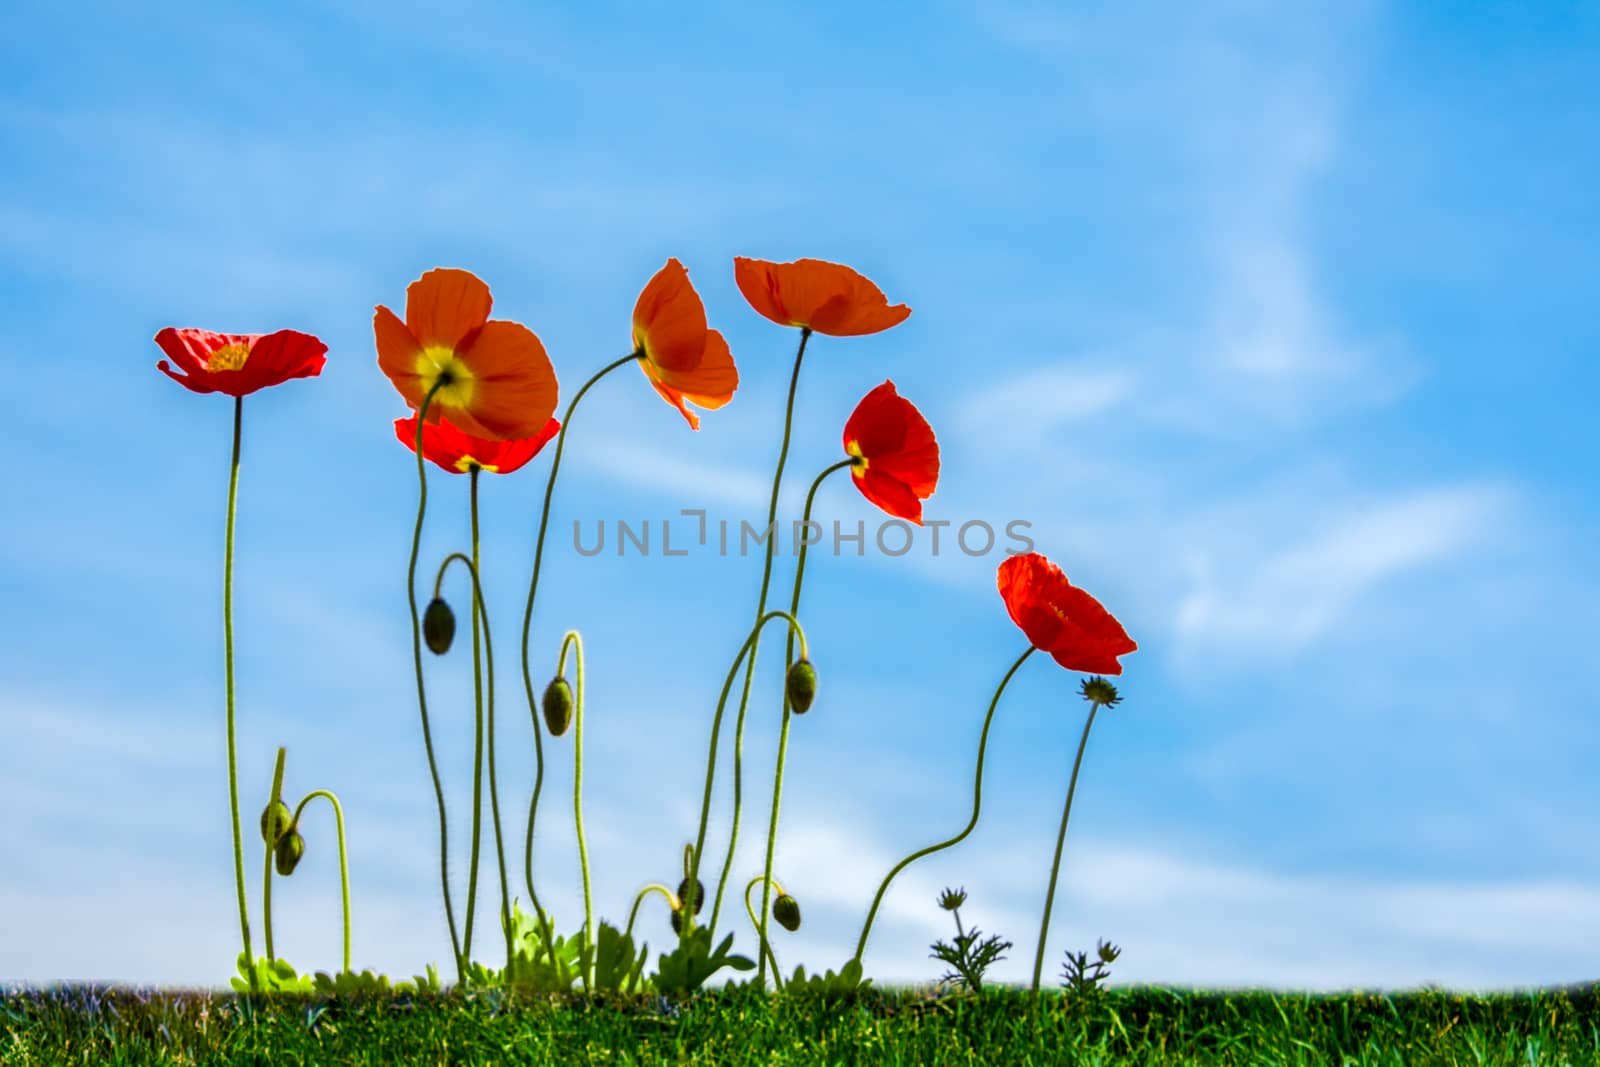 Red poppies on a green meadow against a blue sky by ben44